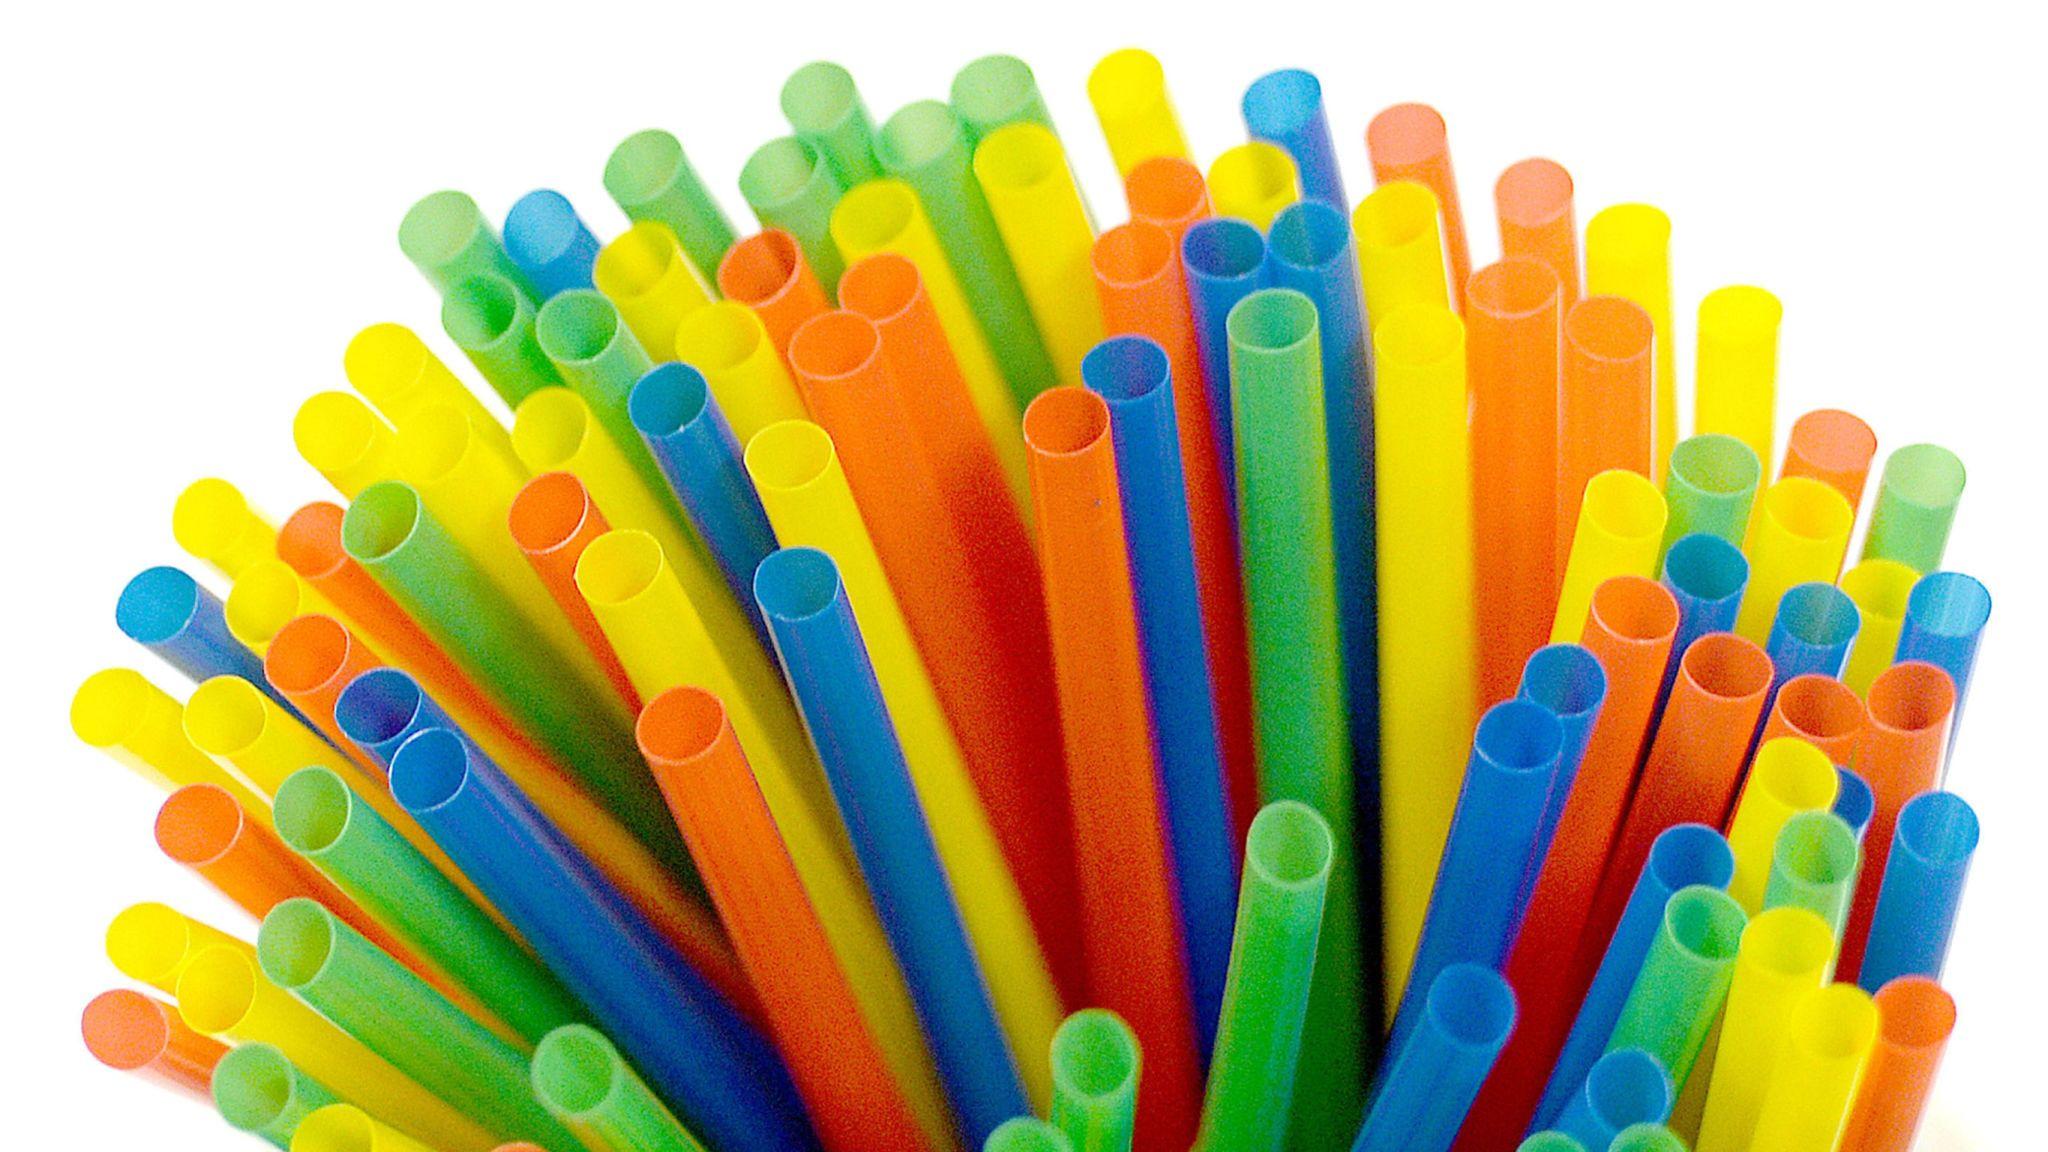 Plastic straws and cotton buds could be banned in England